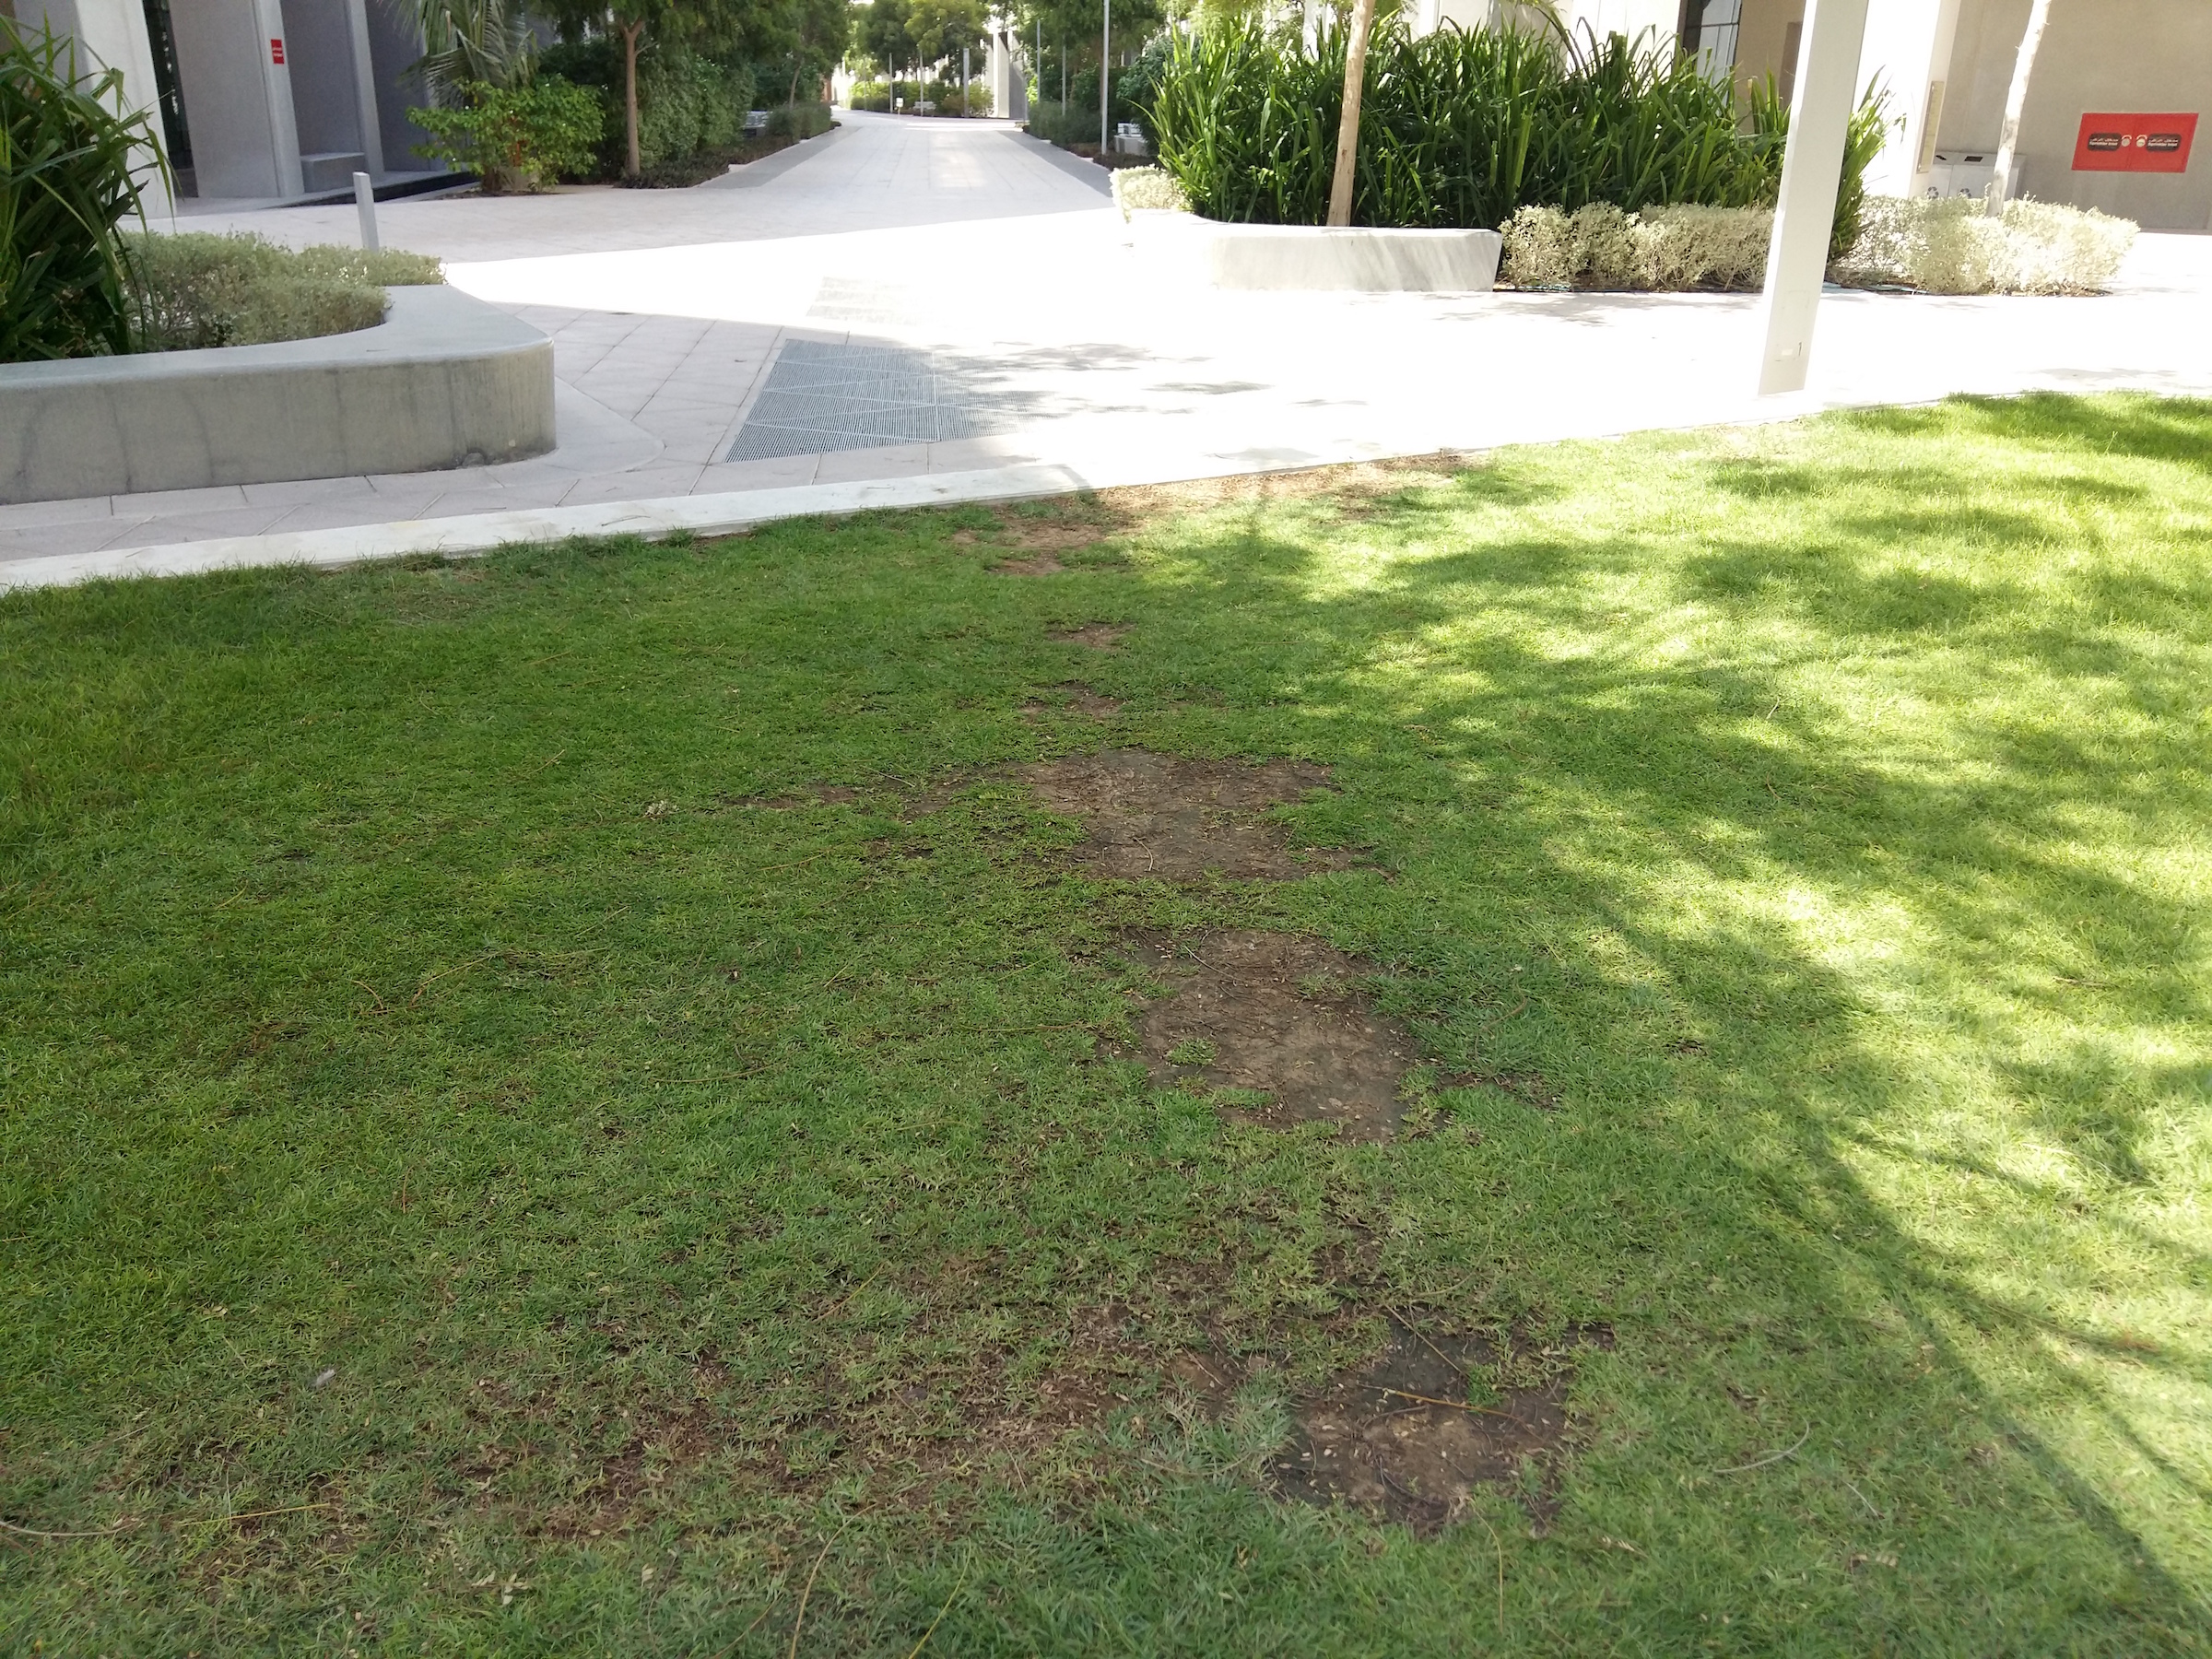 Desire Path on the East Plaza NYUAD